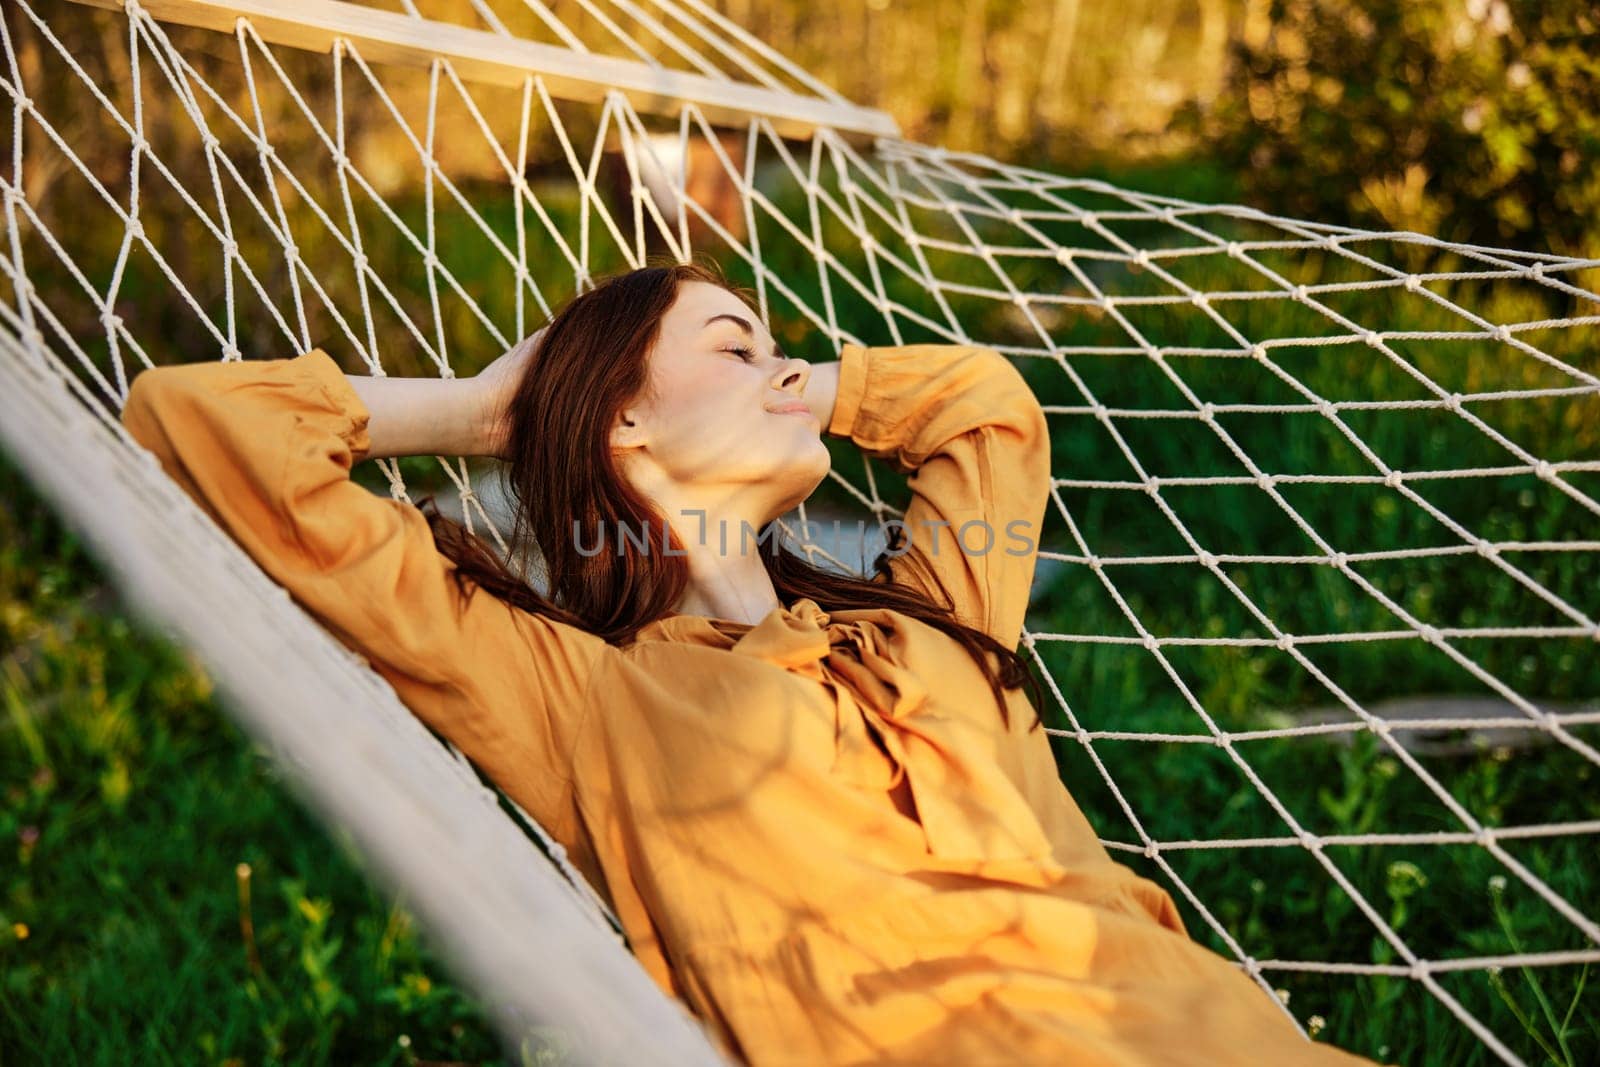 a happy woman is resting in a hammock with her eyes closed and her hands behind her head smiling happily enjoying the day by Vichizh